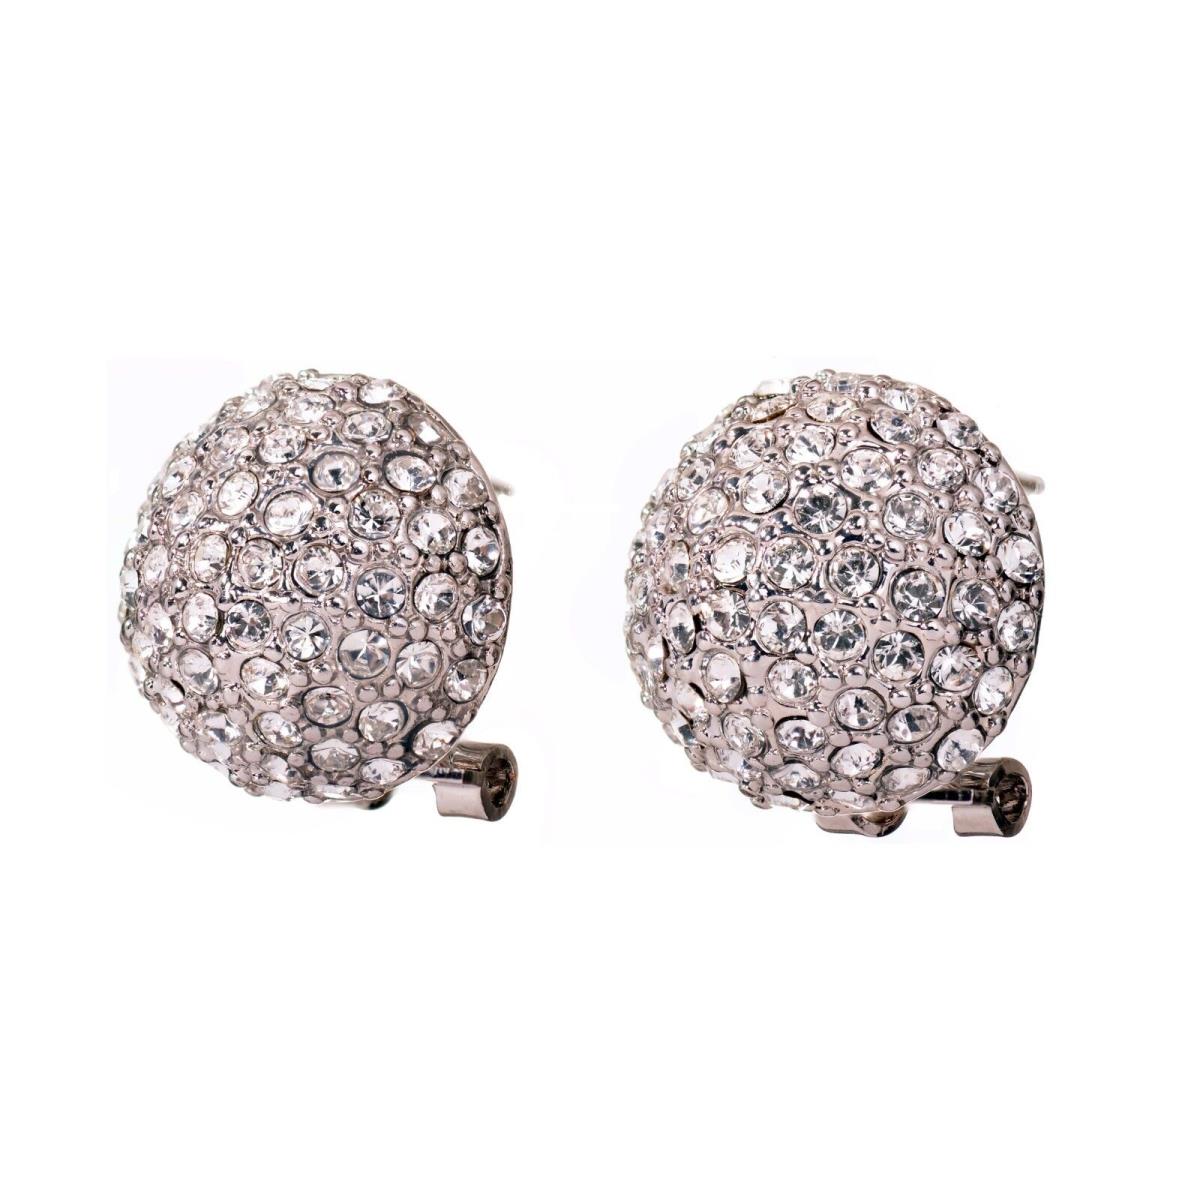 Crystals From Swarovski Lucky Half Ball Earrings Rhodium Plated 7953t